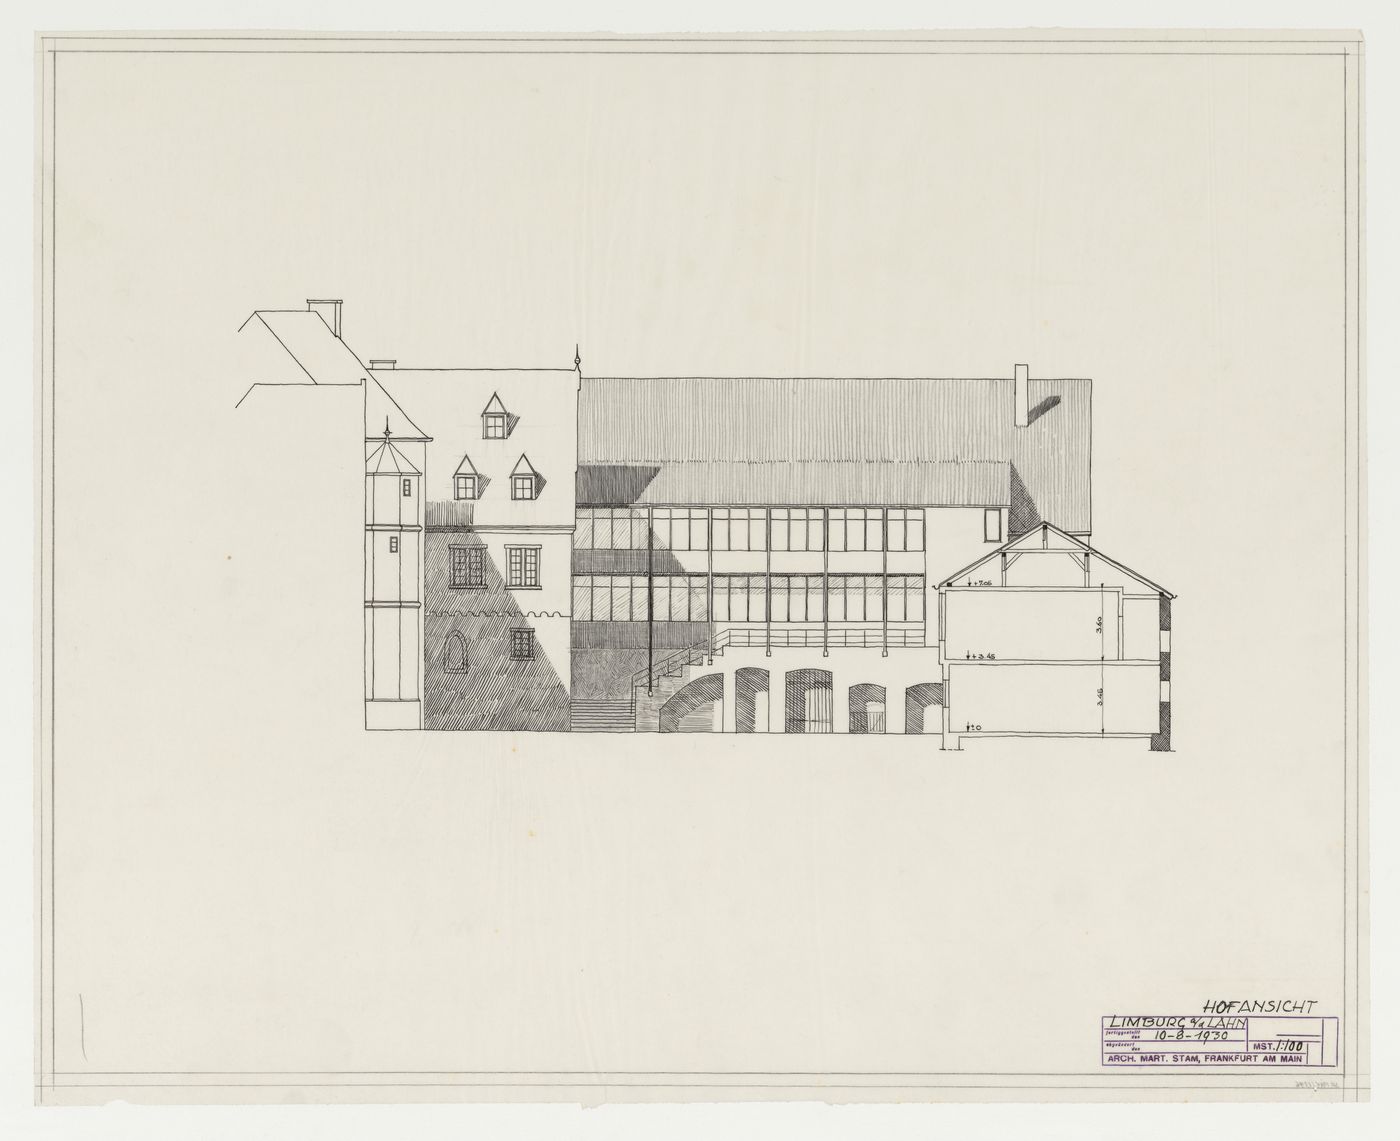 Sectional elevation for an addition to an existing building, possibly a school, Limburg an der Lahn, Germany